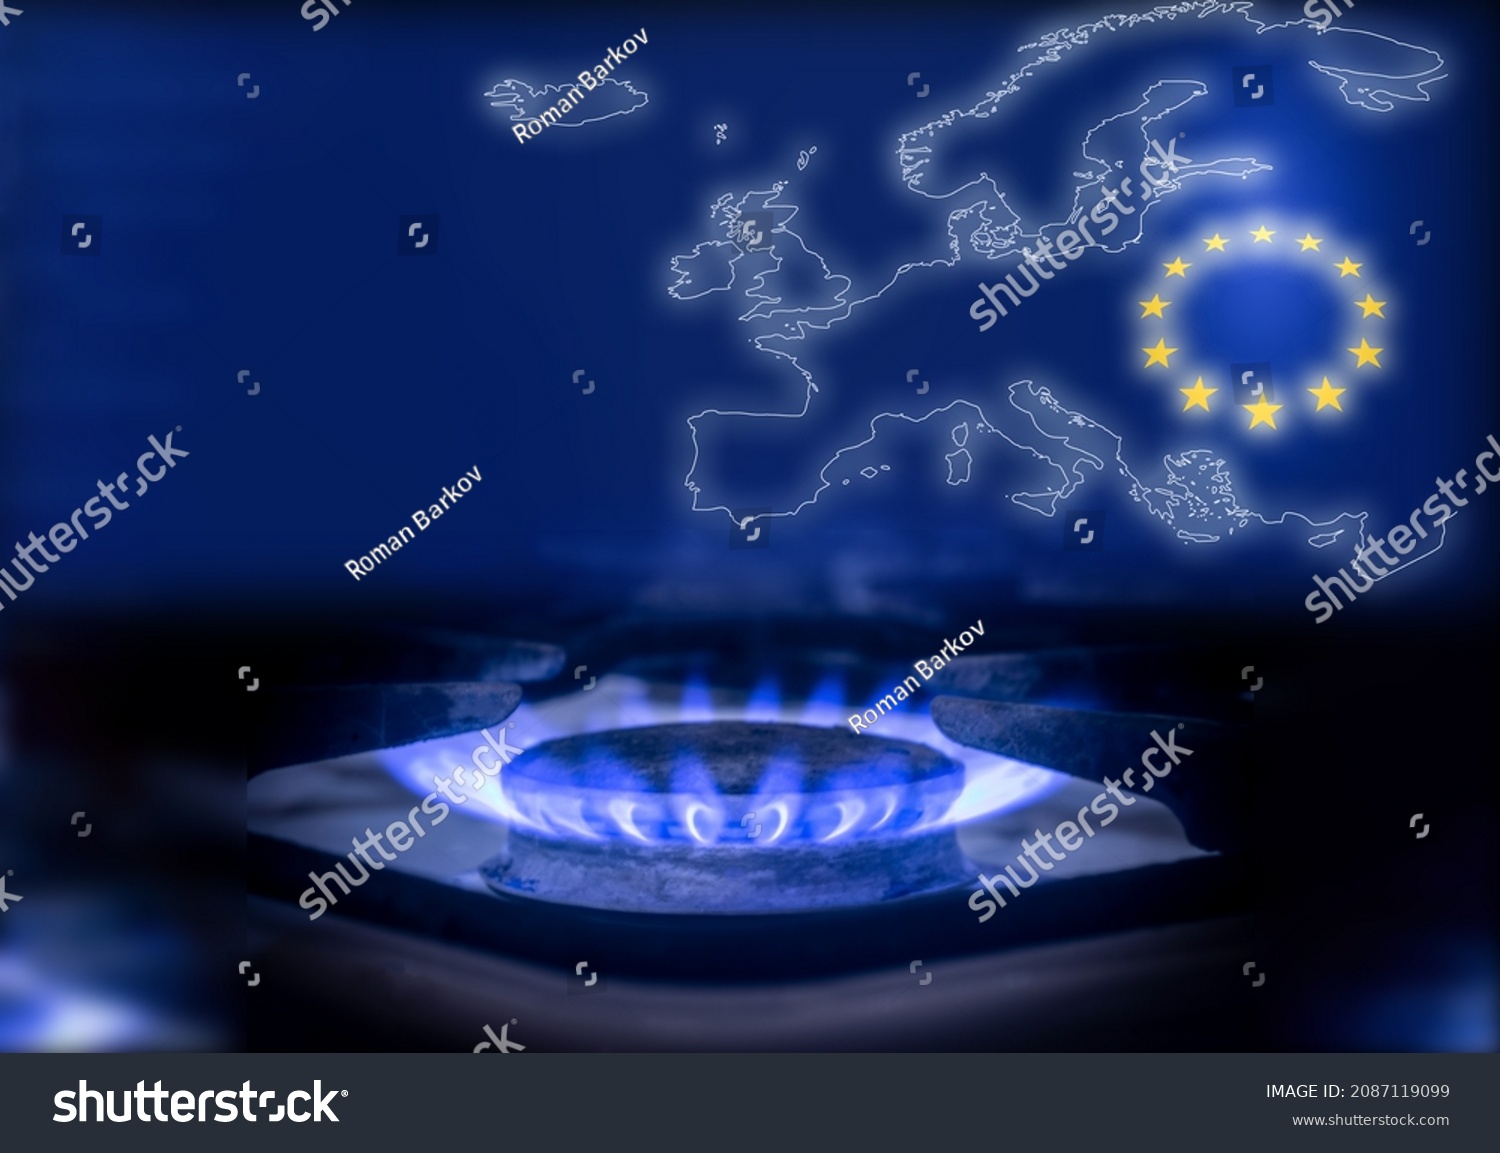 The blue flame of a gas stove in the dark. Gas burner on the background of the map and the flag of the European Union. The concept of gas consumption in Europe #2087119099